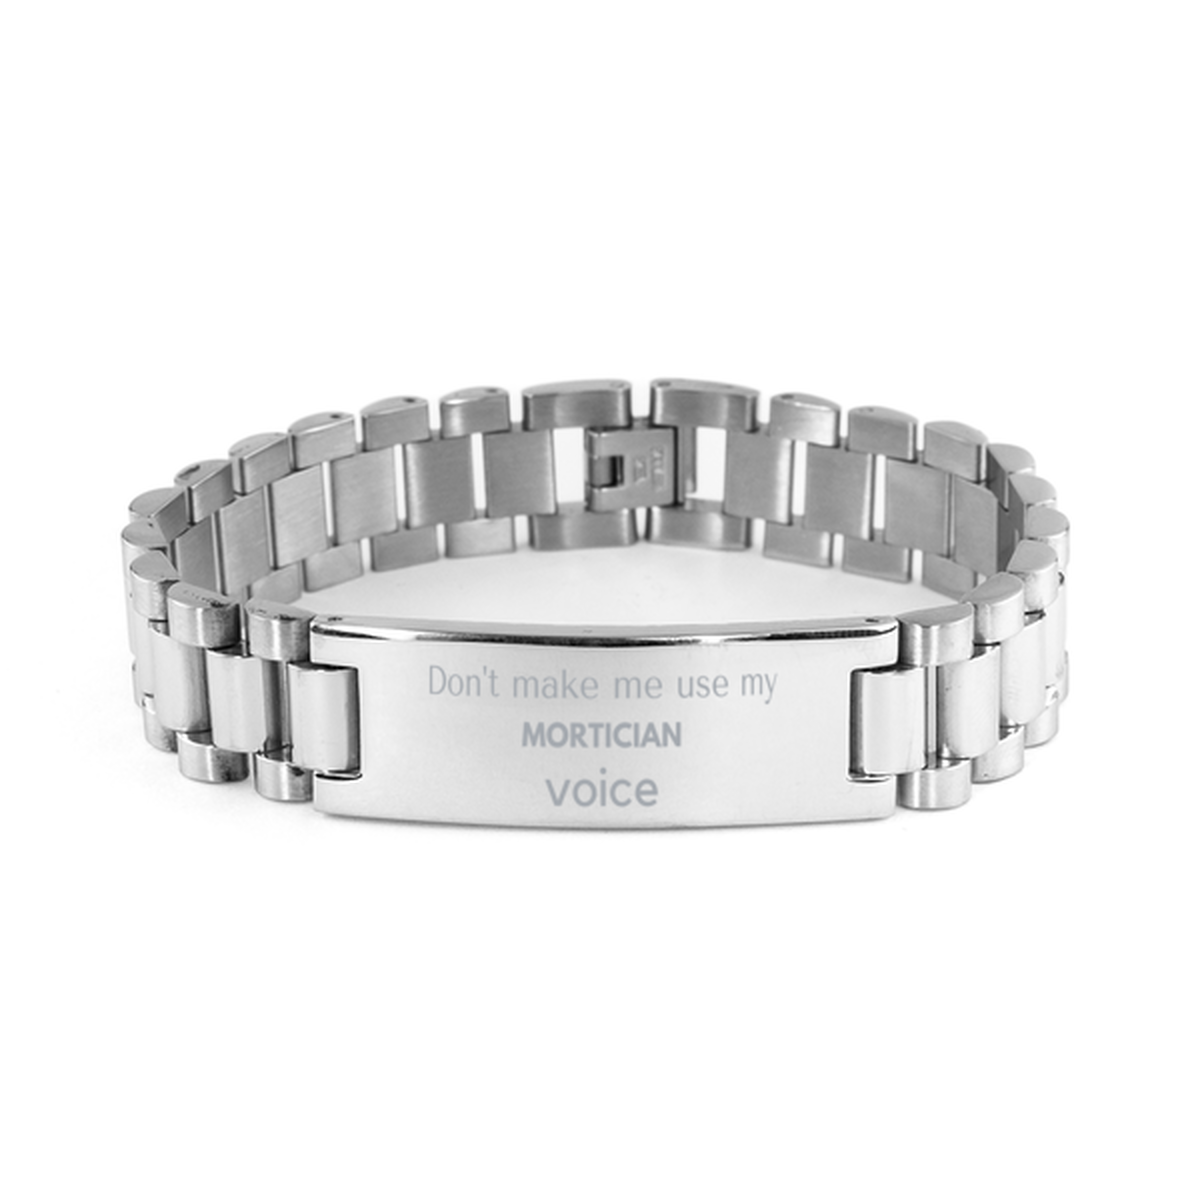 Don't make me use my Mortician voice, Sarcasm Mortician Gifts, Christmas Mortician Ladder Stainless Steel Bracelet Birthday Unique Gifts For Mortician Coworkers, Men, Women, Colleague, Friends